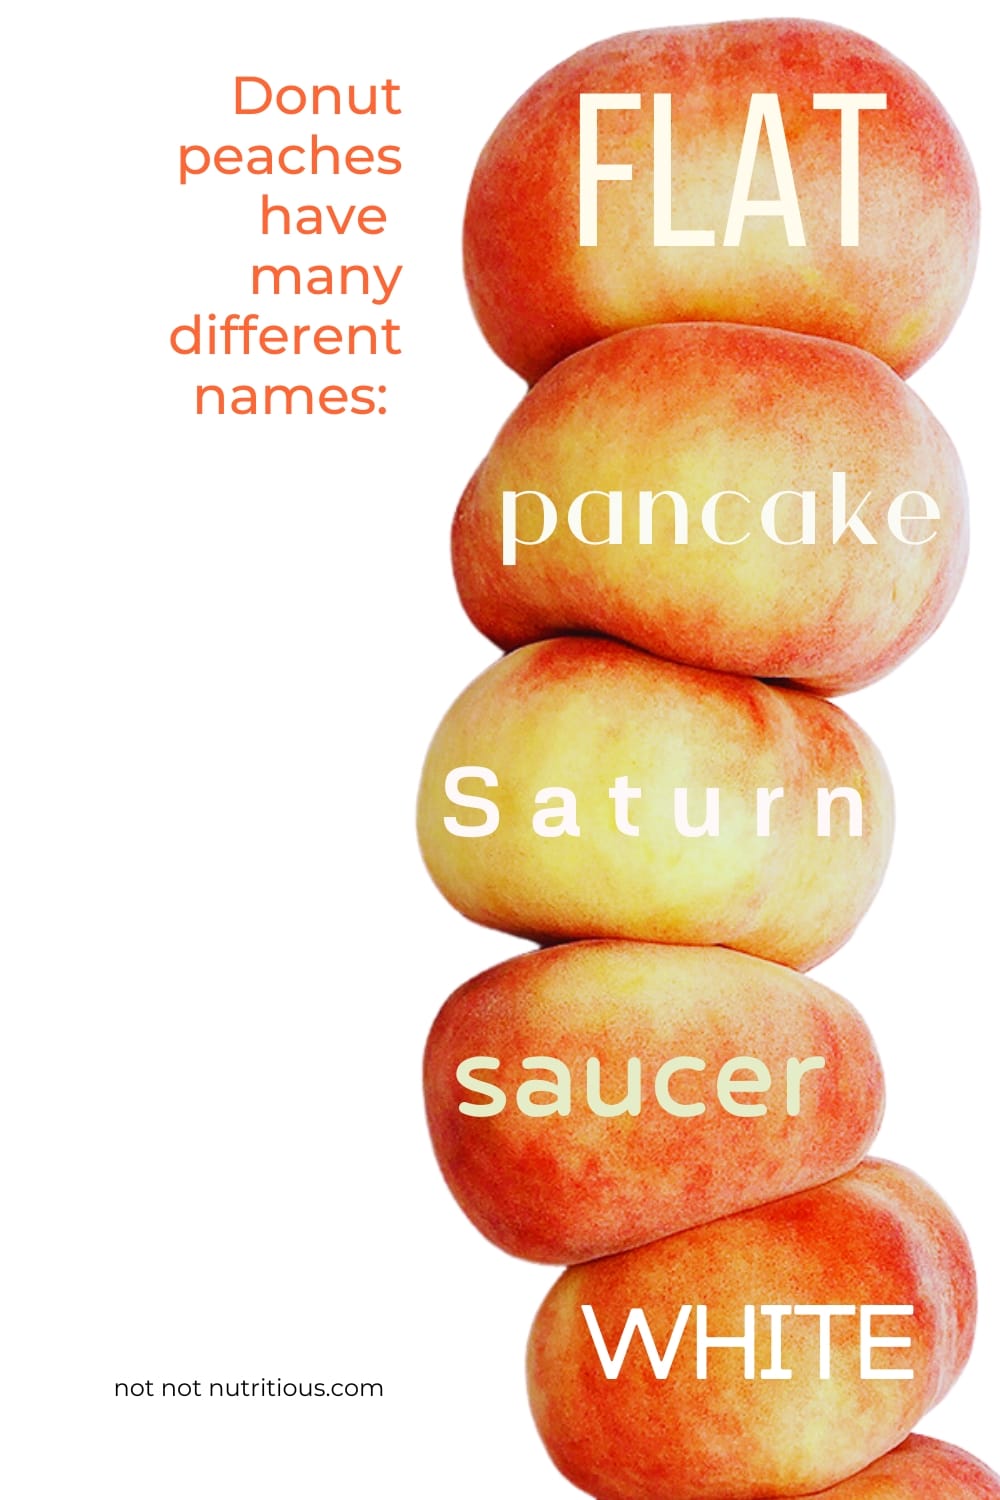 Infographic with the different names for donut peaches: flat, pancake, saturn, saucer, white